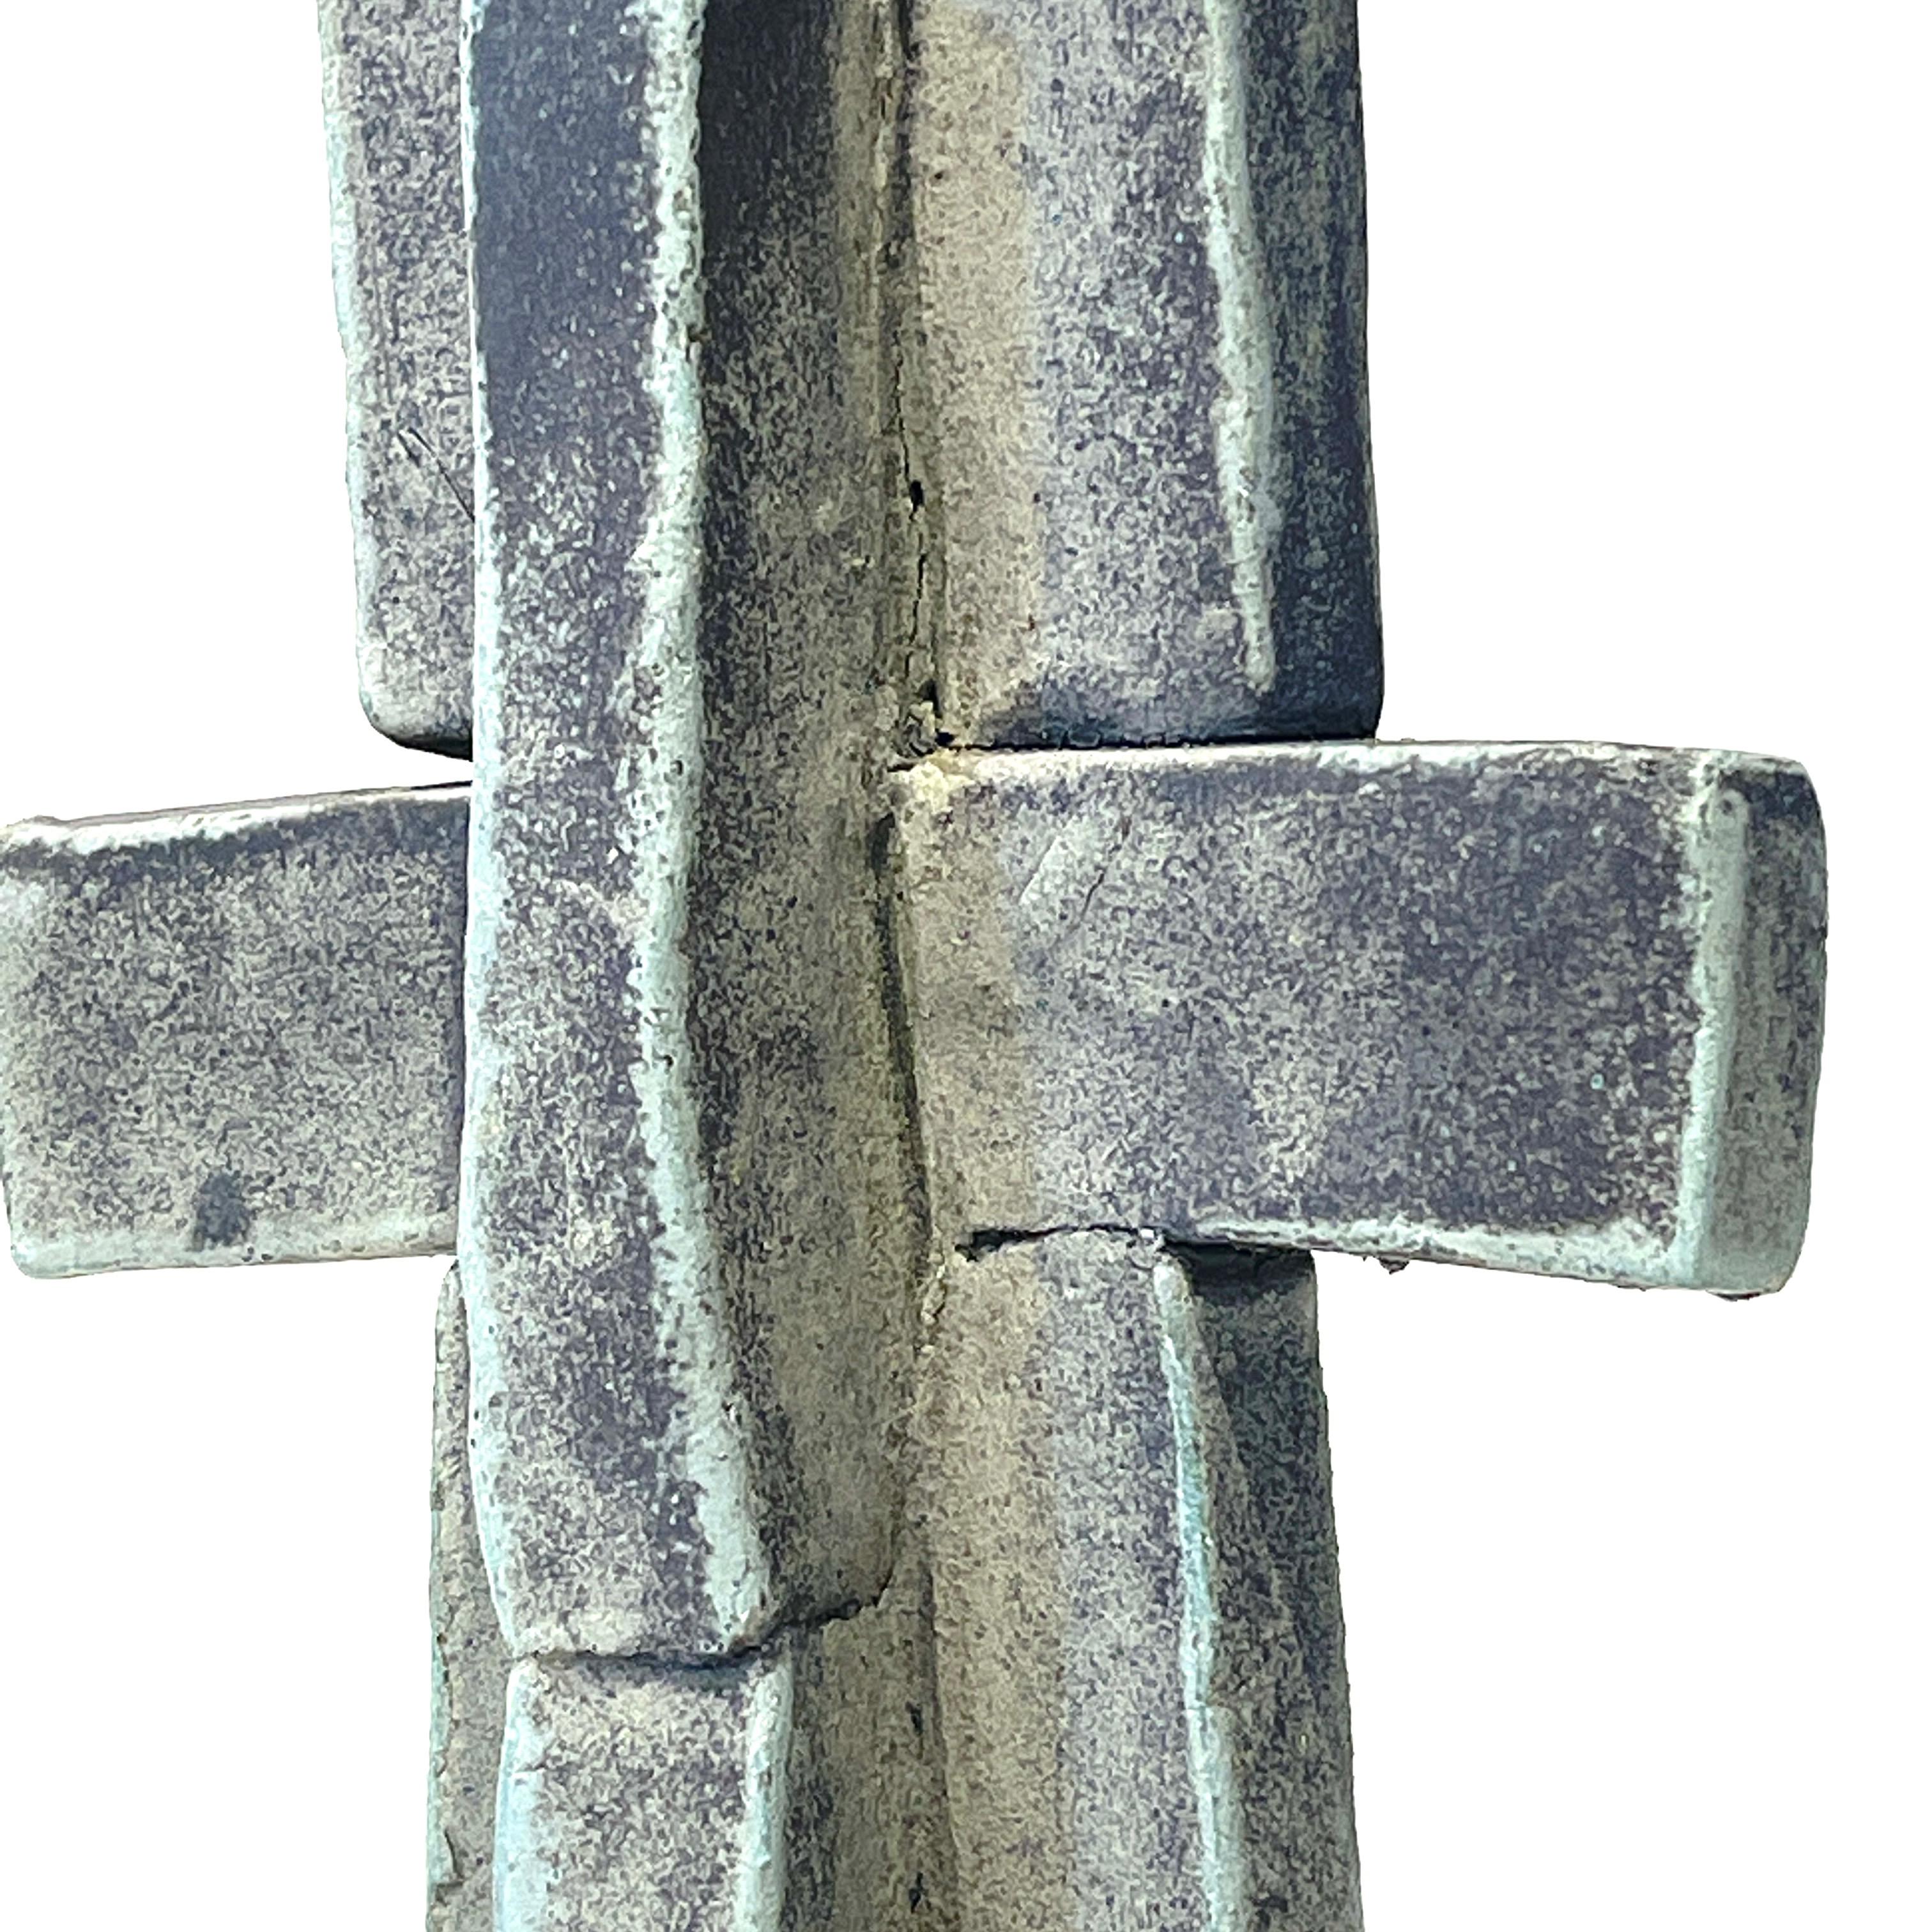 'Cross Reference' Weathered Bronze Ceramic Sculpture - Gray Abstract Sculpture by Judy Engel